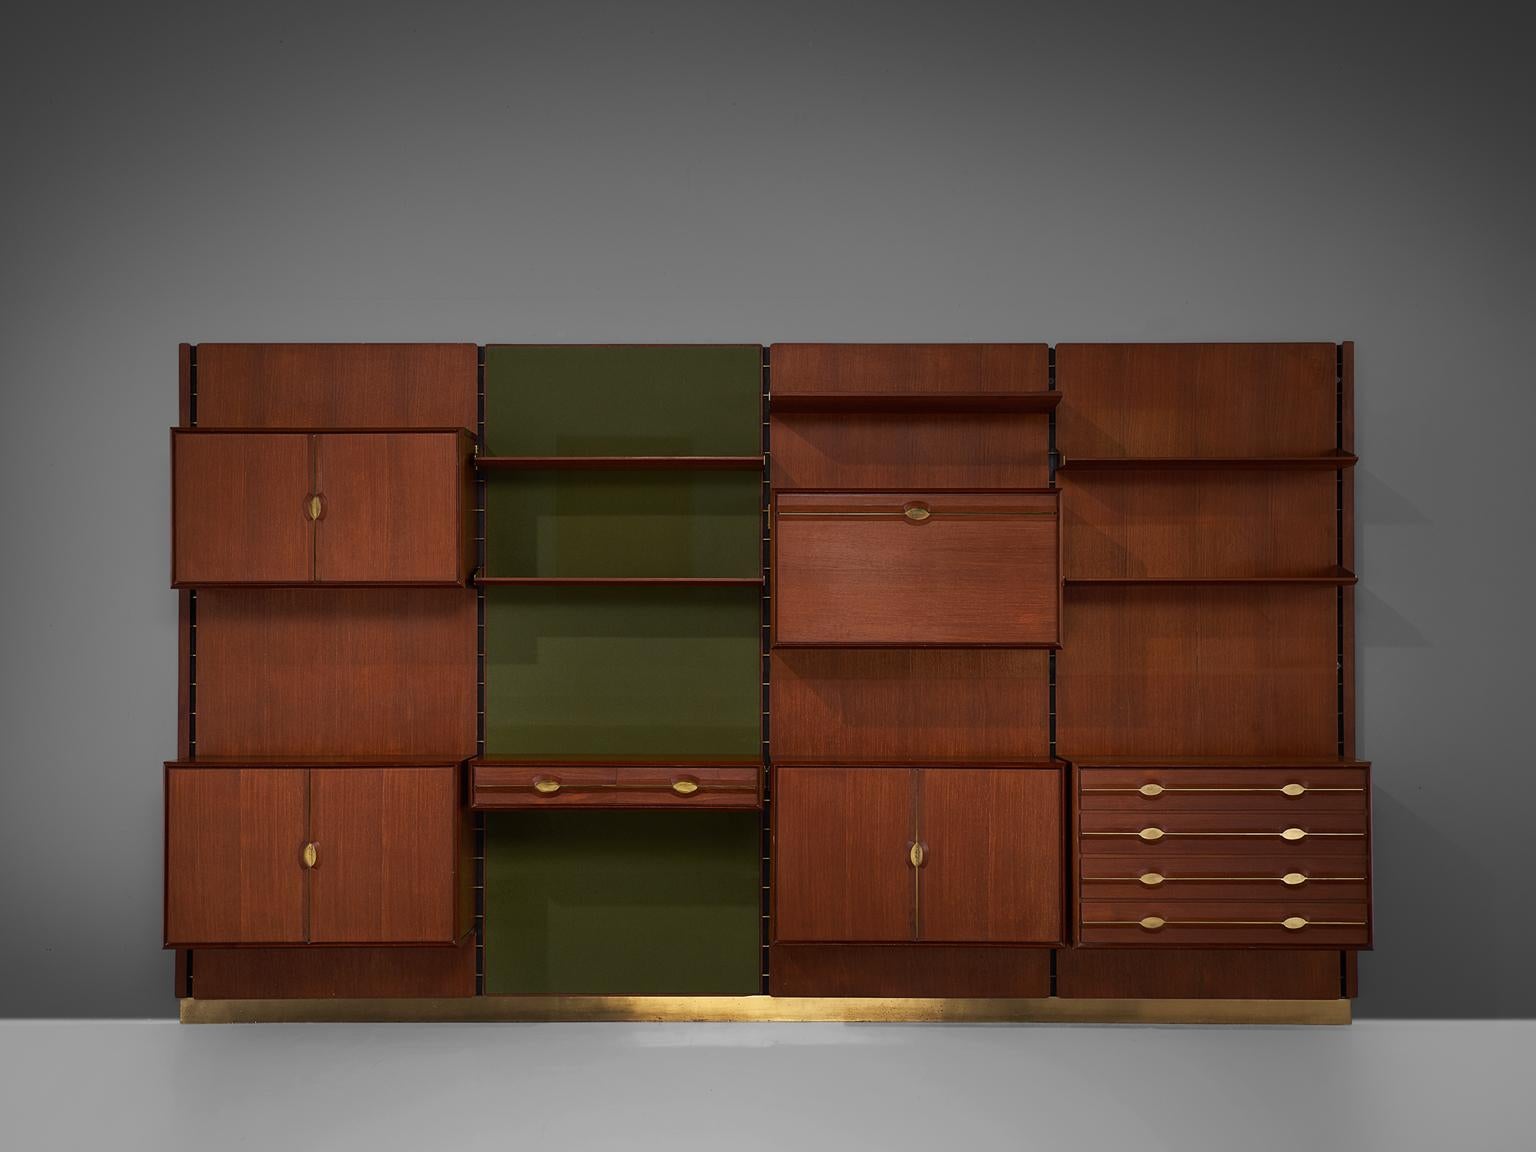 Cabinet by La Permanente Mobili Cantu, brass, teak, Italy, circa, 1955.

The monumental wall-mounted cabinet consists of four wall panels with various different storage facilities. The finish and details of this shelving wall unit are of a very